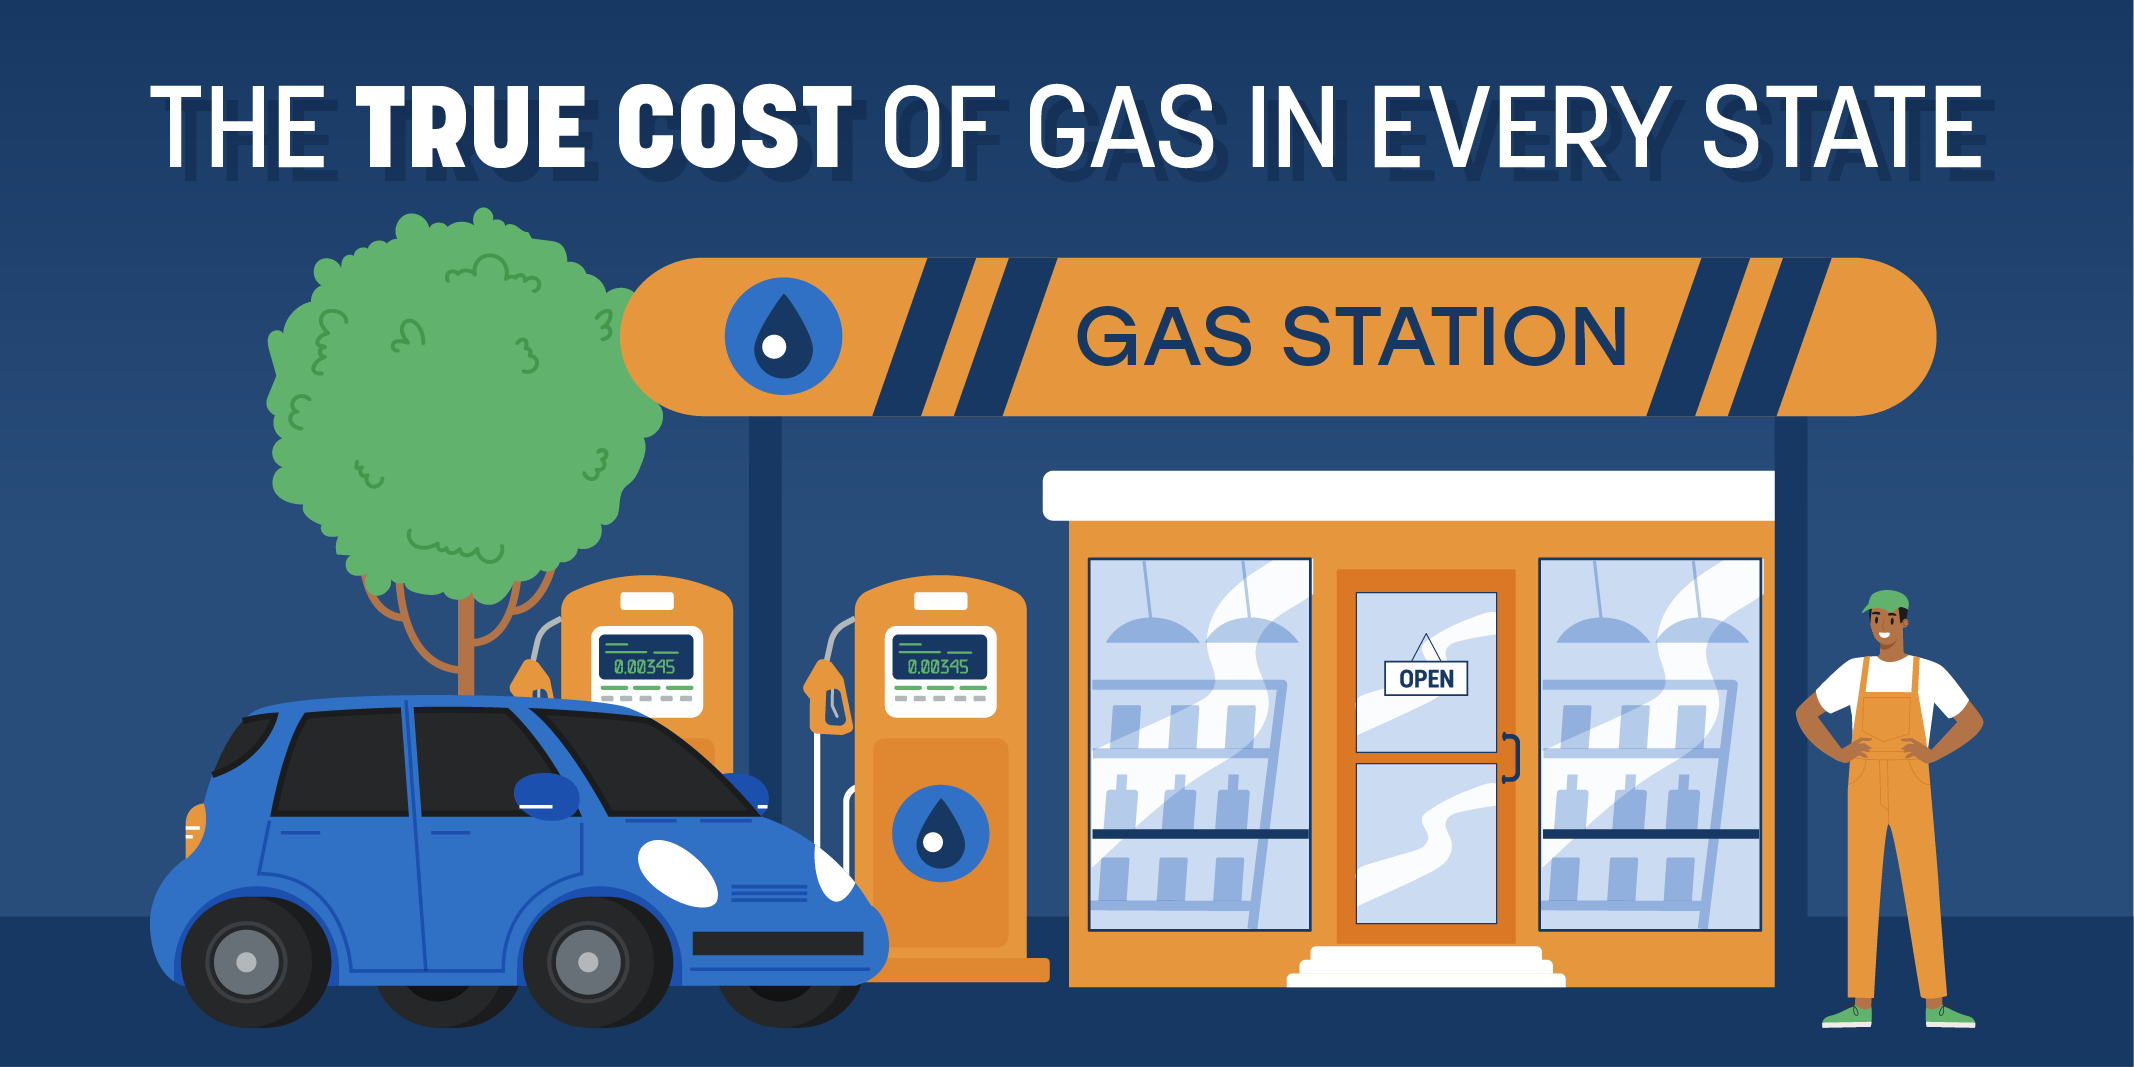 Featured image for the true cost of gas campaign